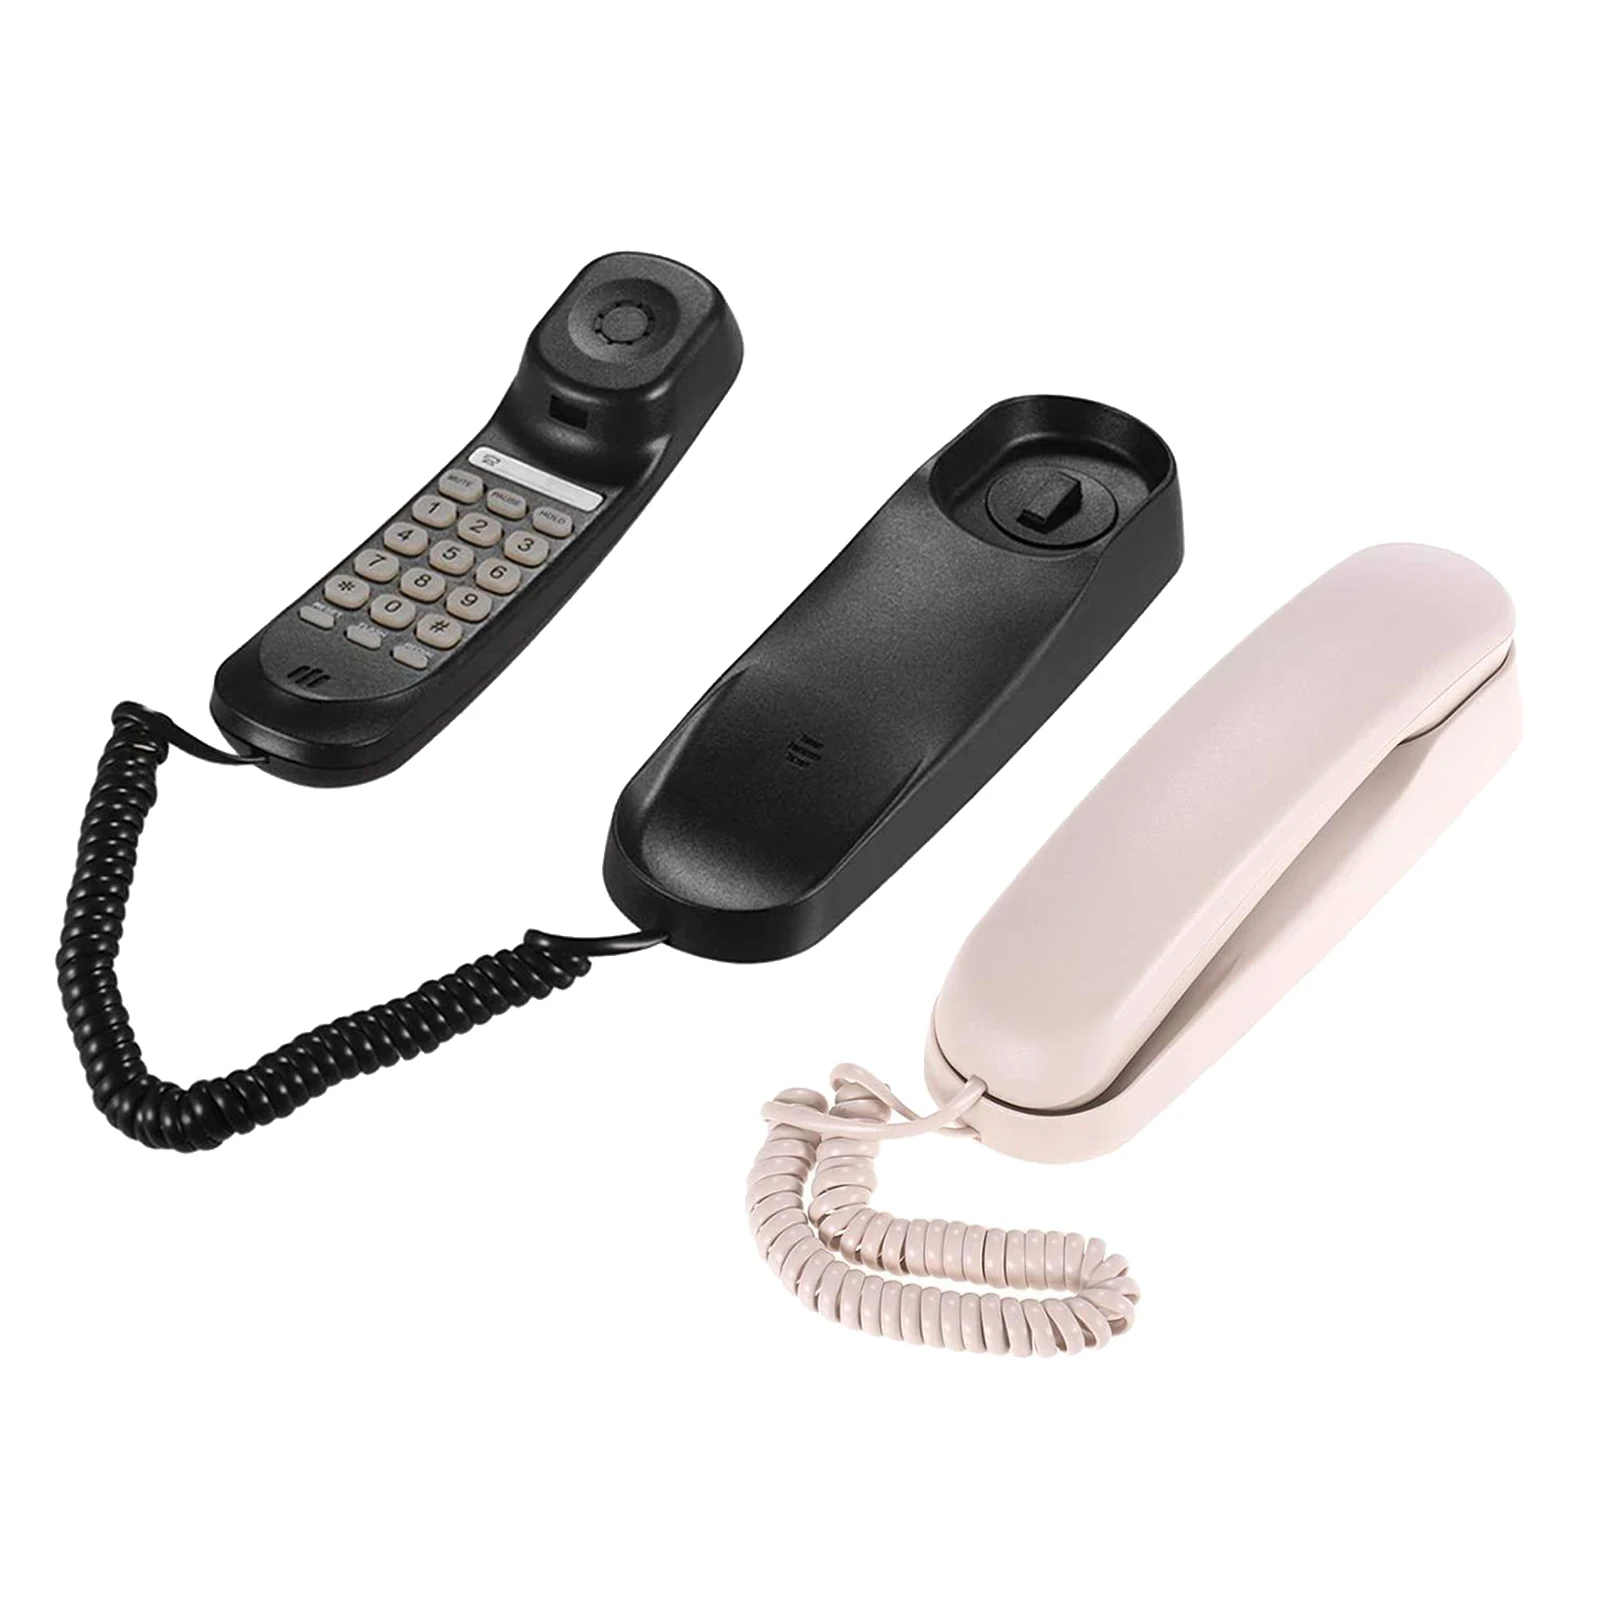 Mini Corded Home Office Telephone Landline Phone Flash/Redial Functions